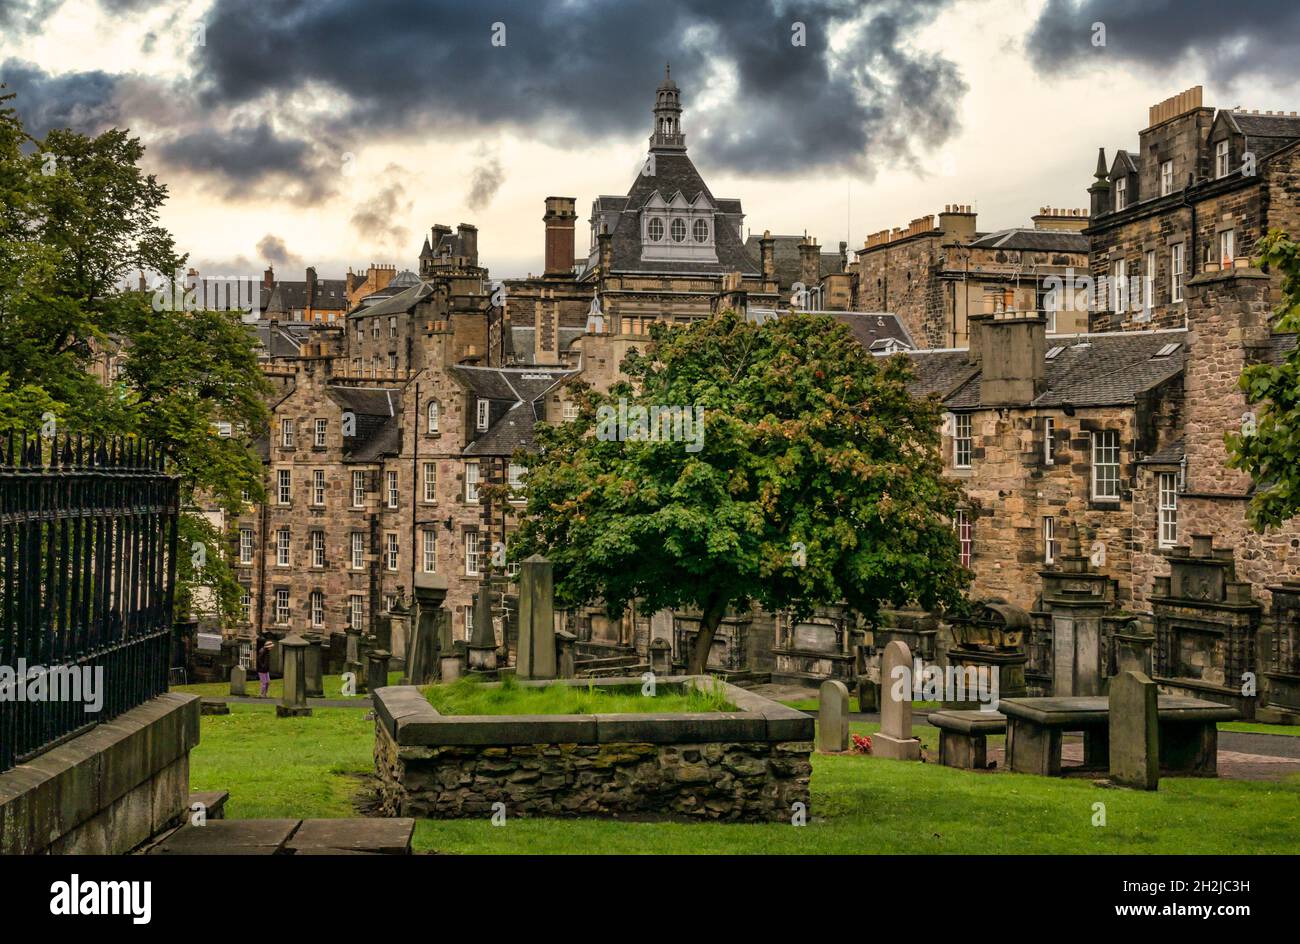 View from Greyfriar's Kirkyard with tombs and gravestones, and skyline and rooftops, including Central Library, of Old Town, Edinburgh, Scotland, UK Stock Photo